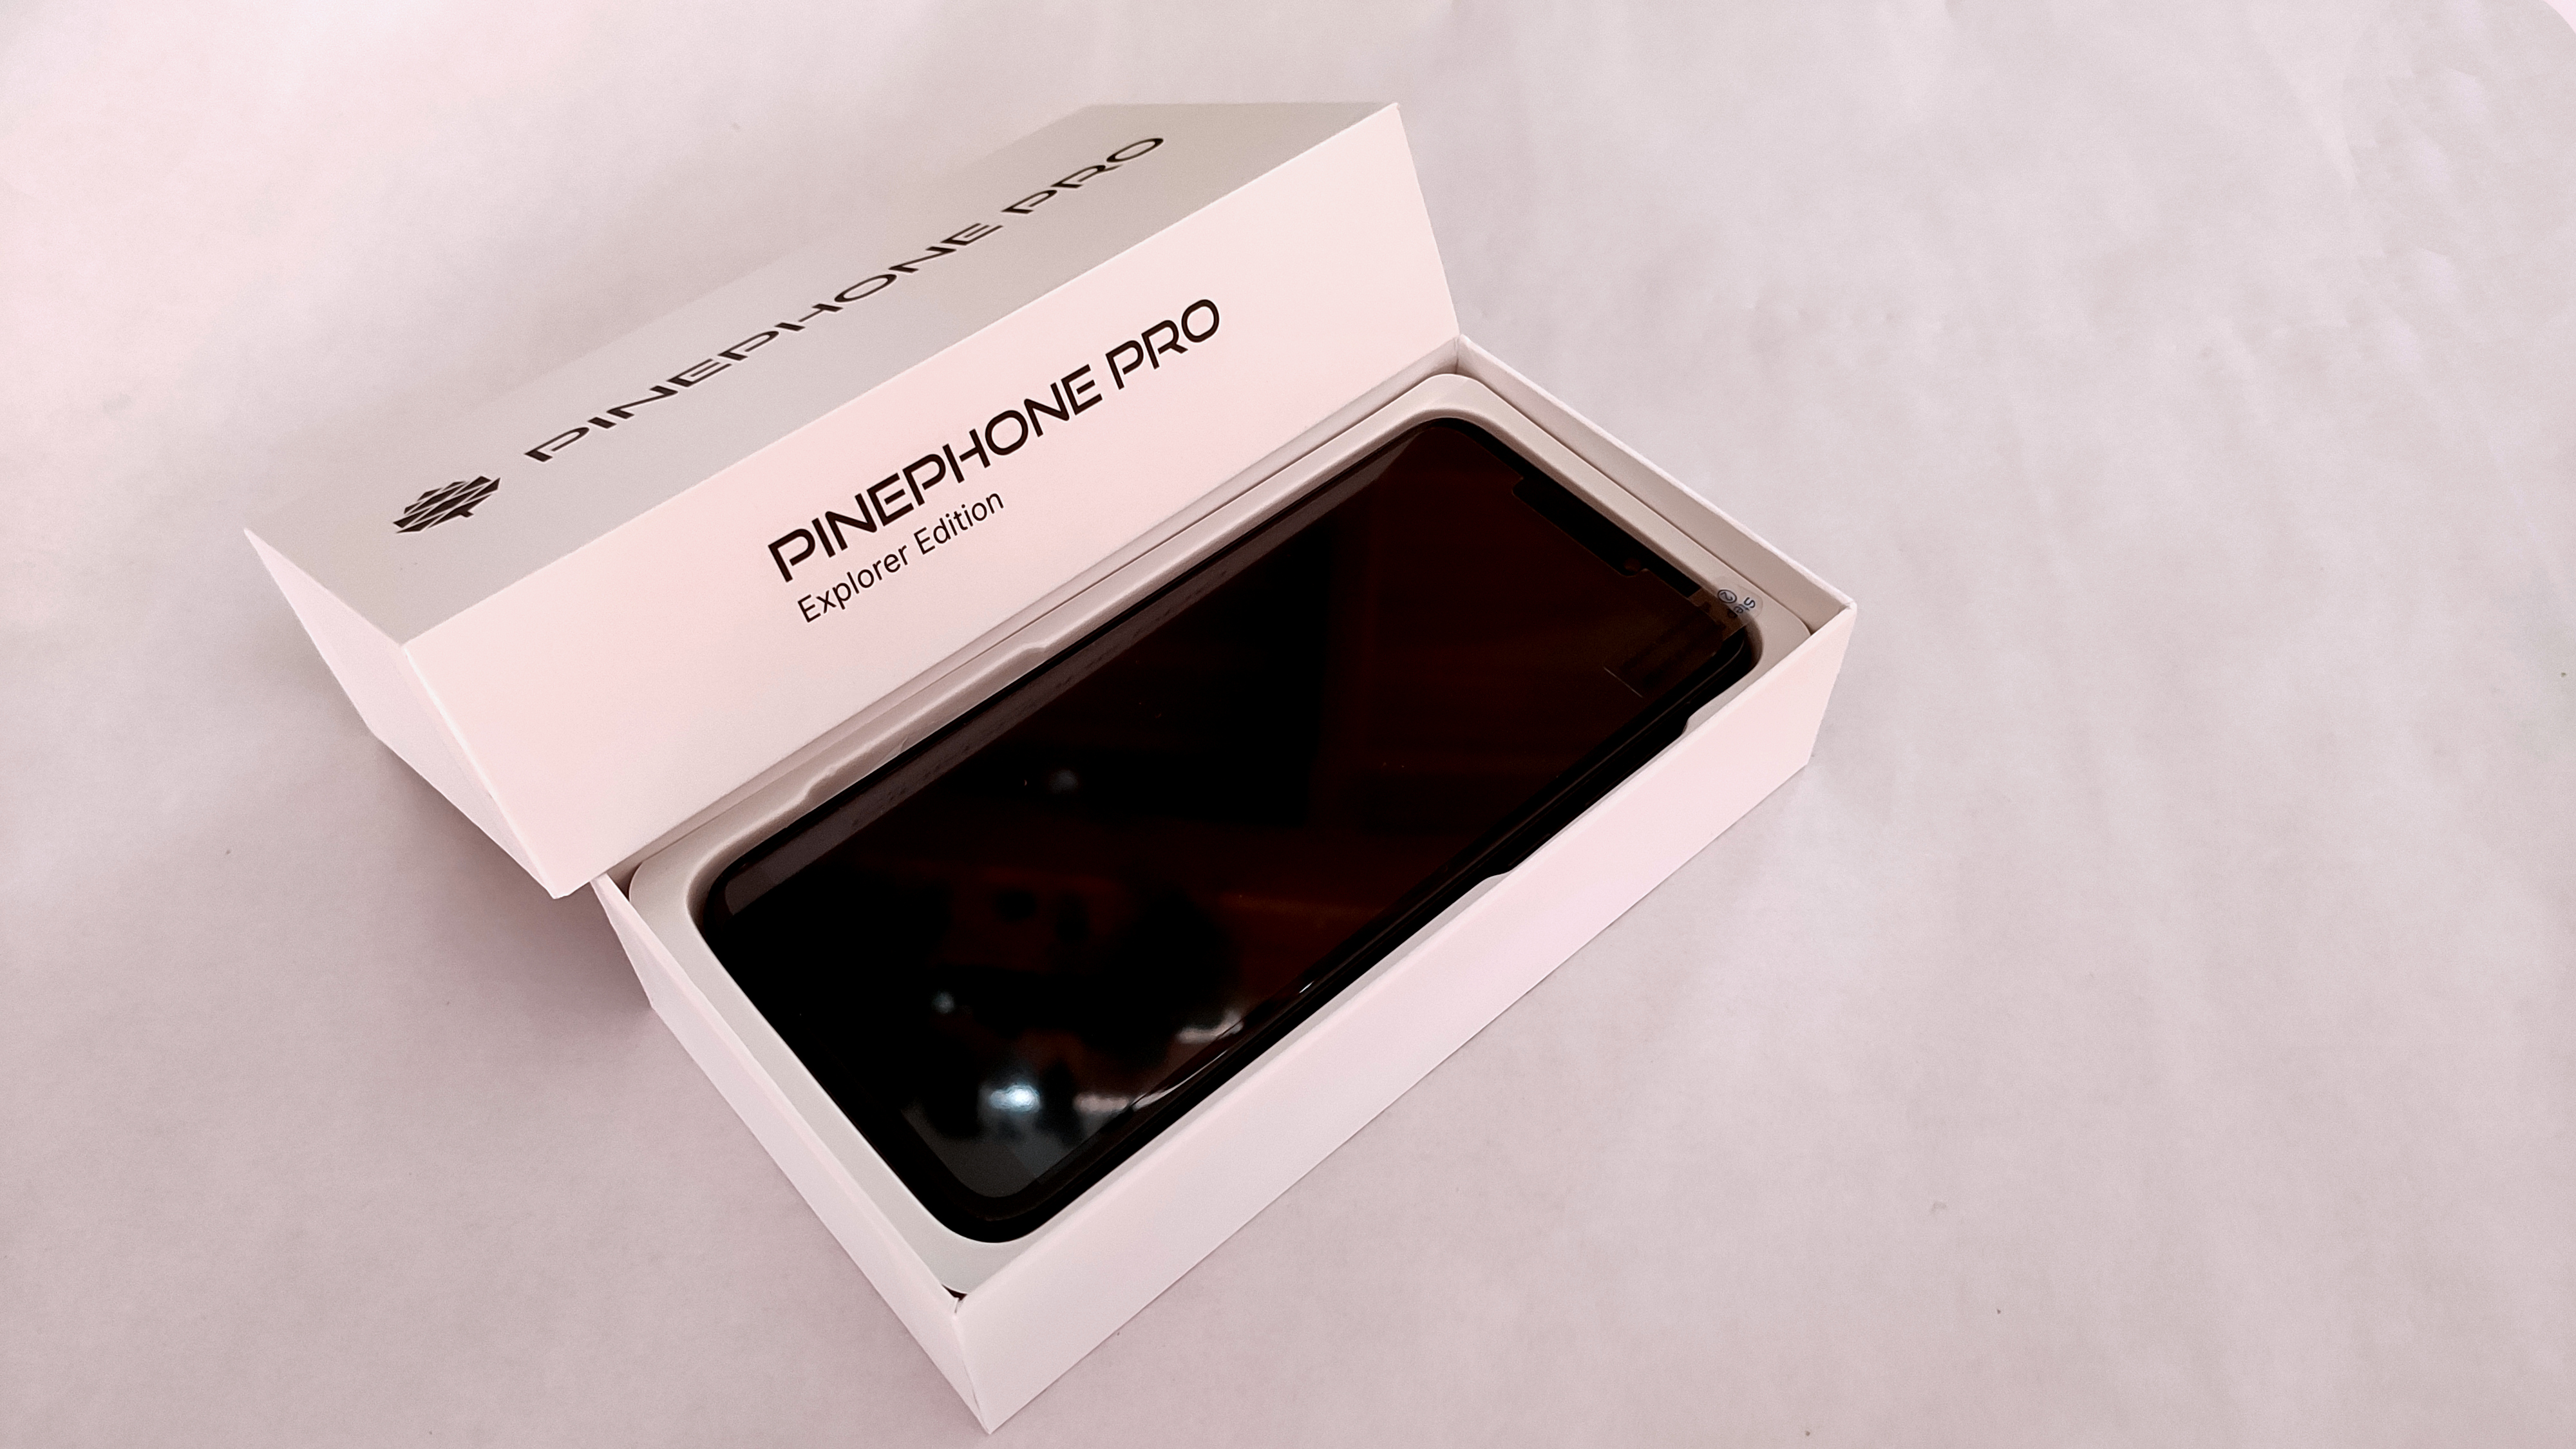 The PinePhone Pro is here!